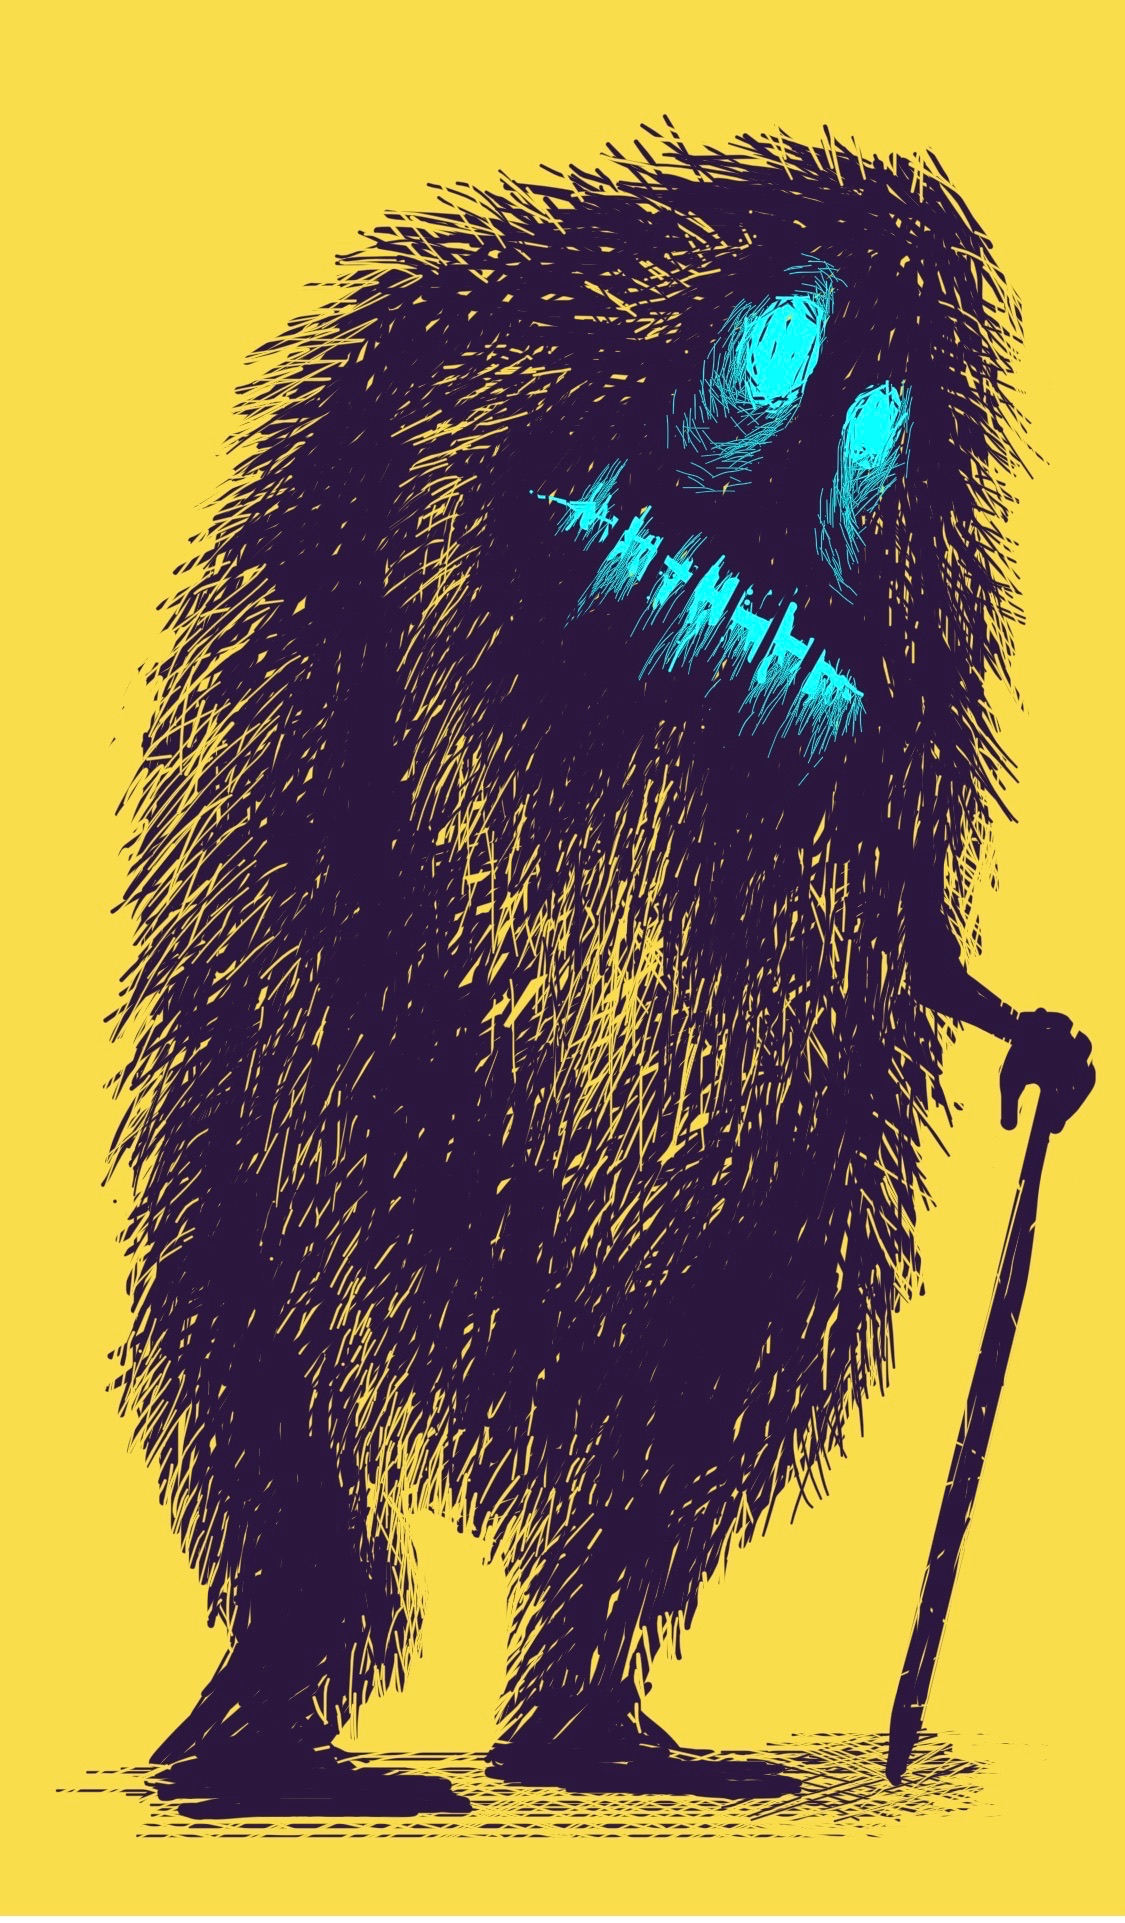 A fat, furry monster with glowing blue eyes and a cane